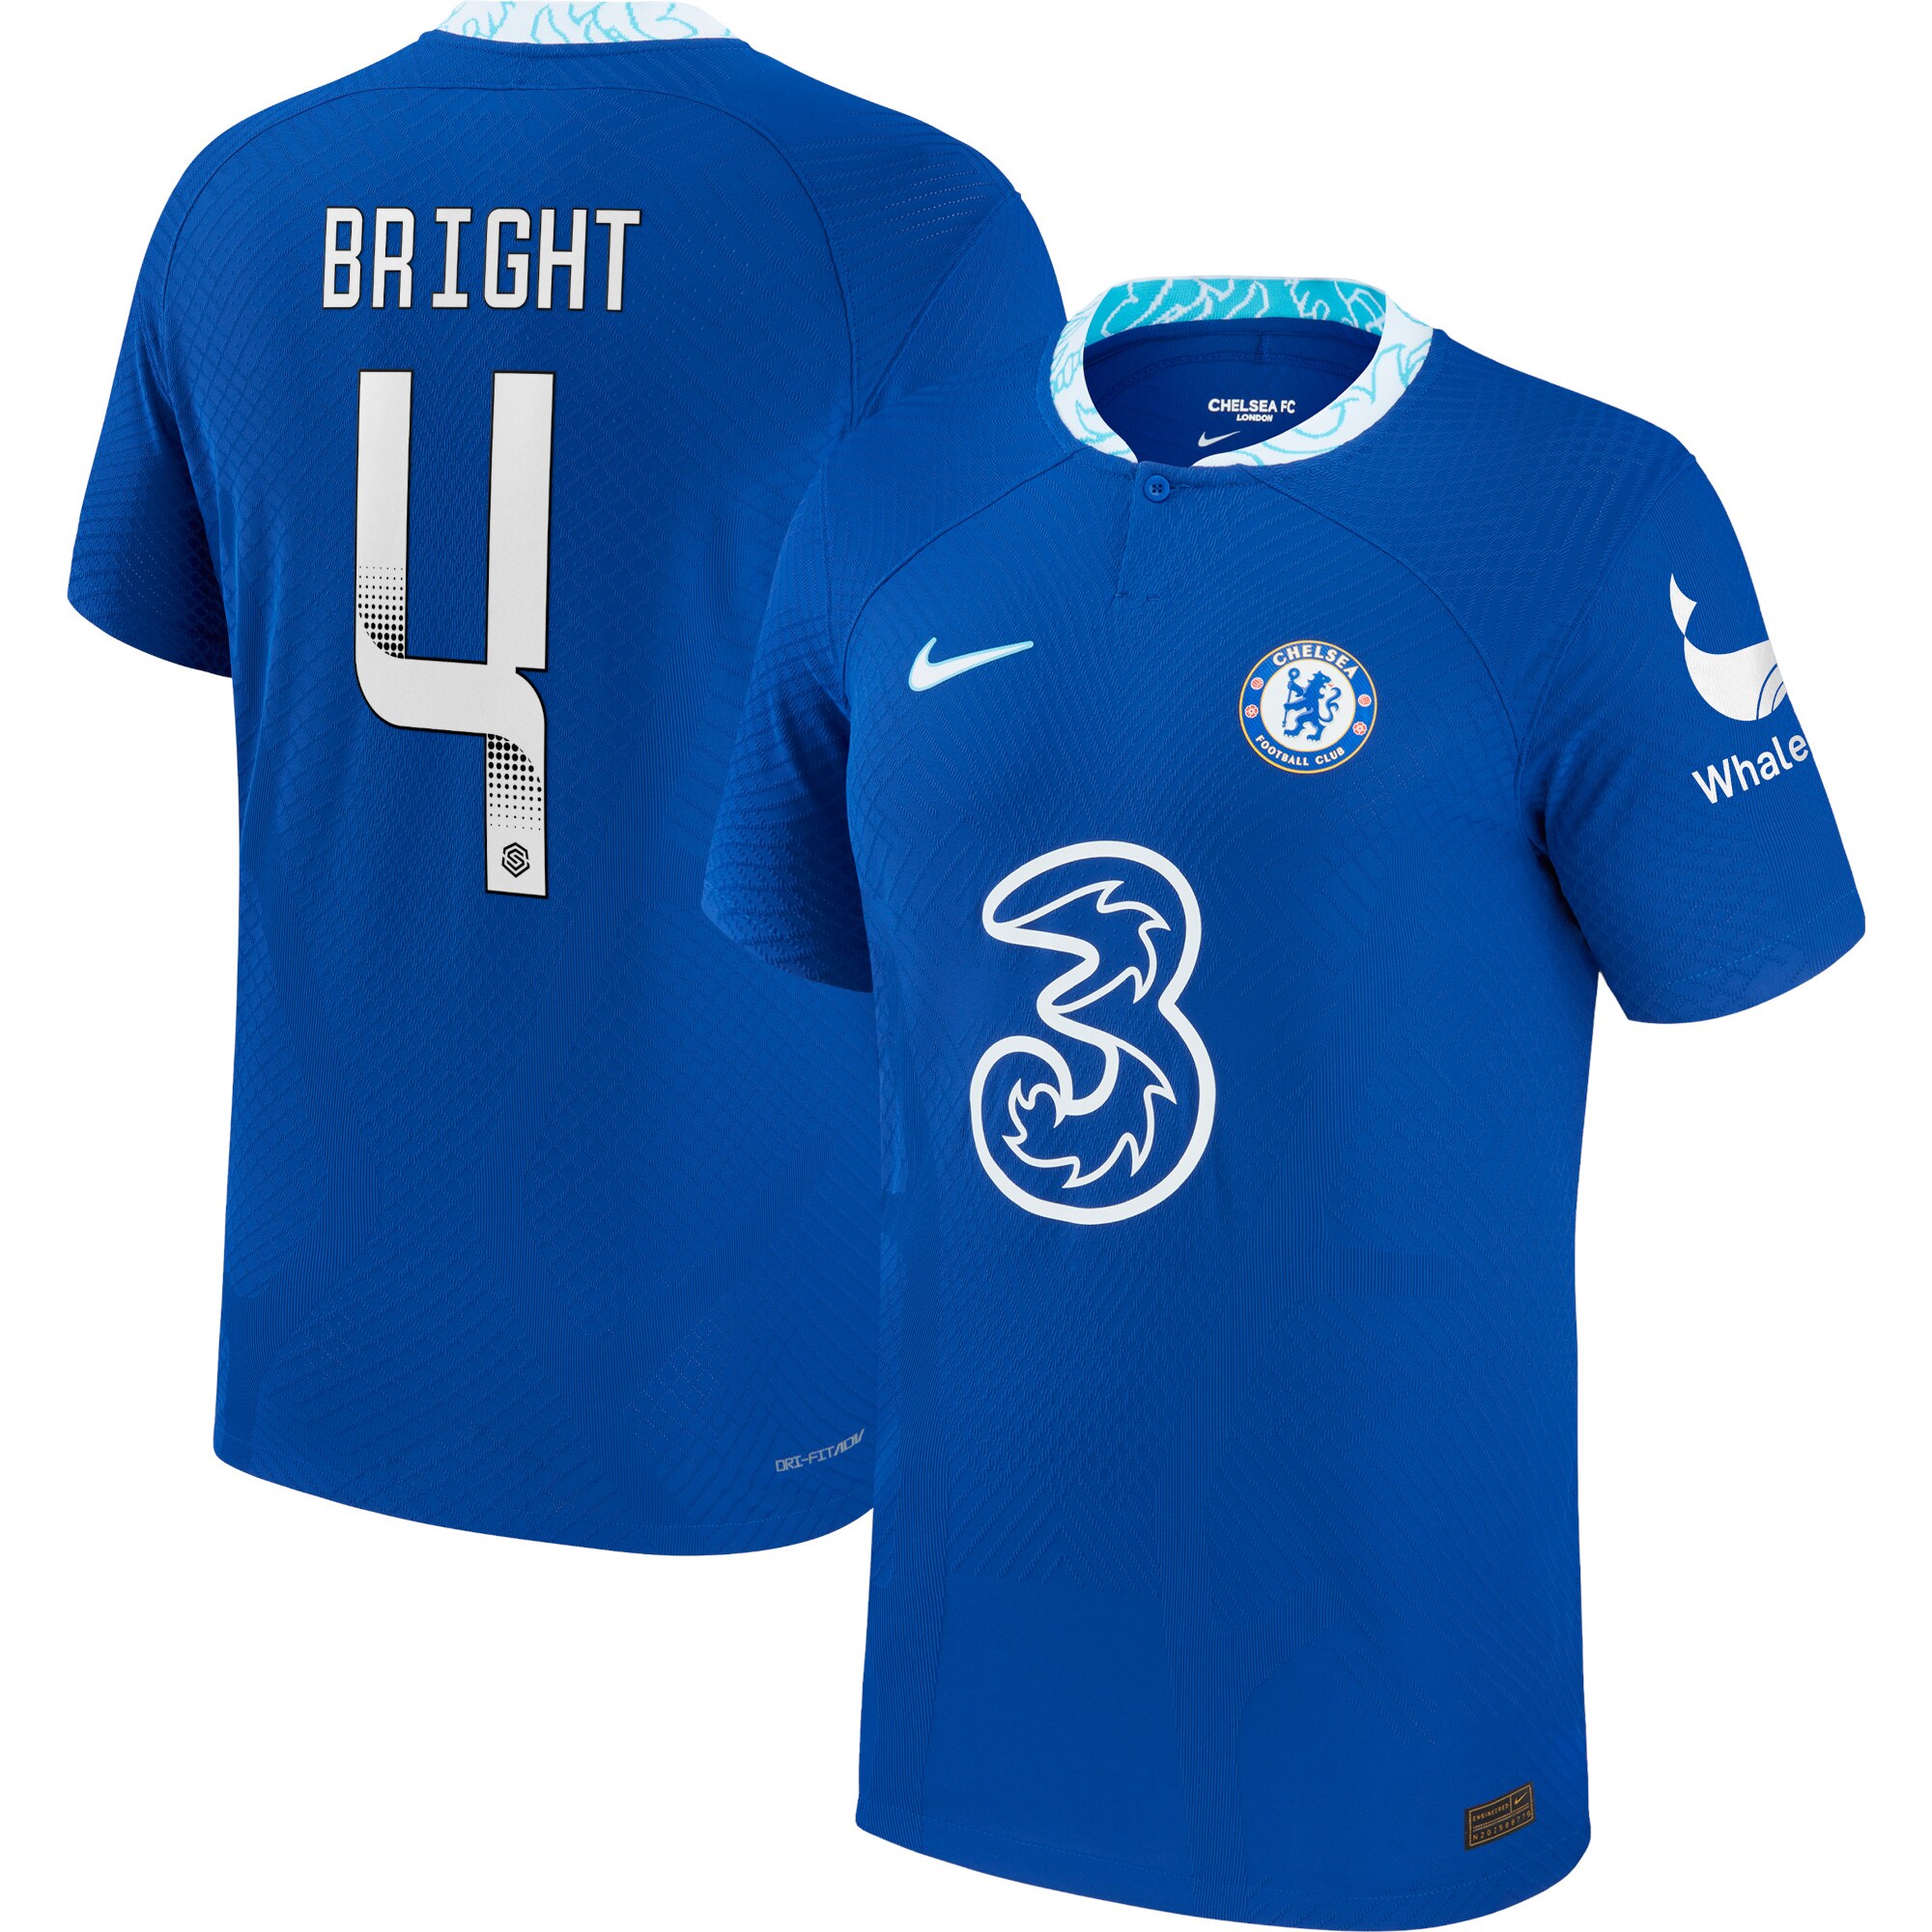 Chelsea WSL Home Vapor Match Shirt 2022-23 with Bright 4 printing